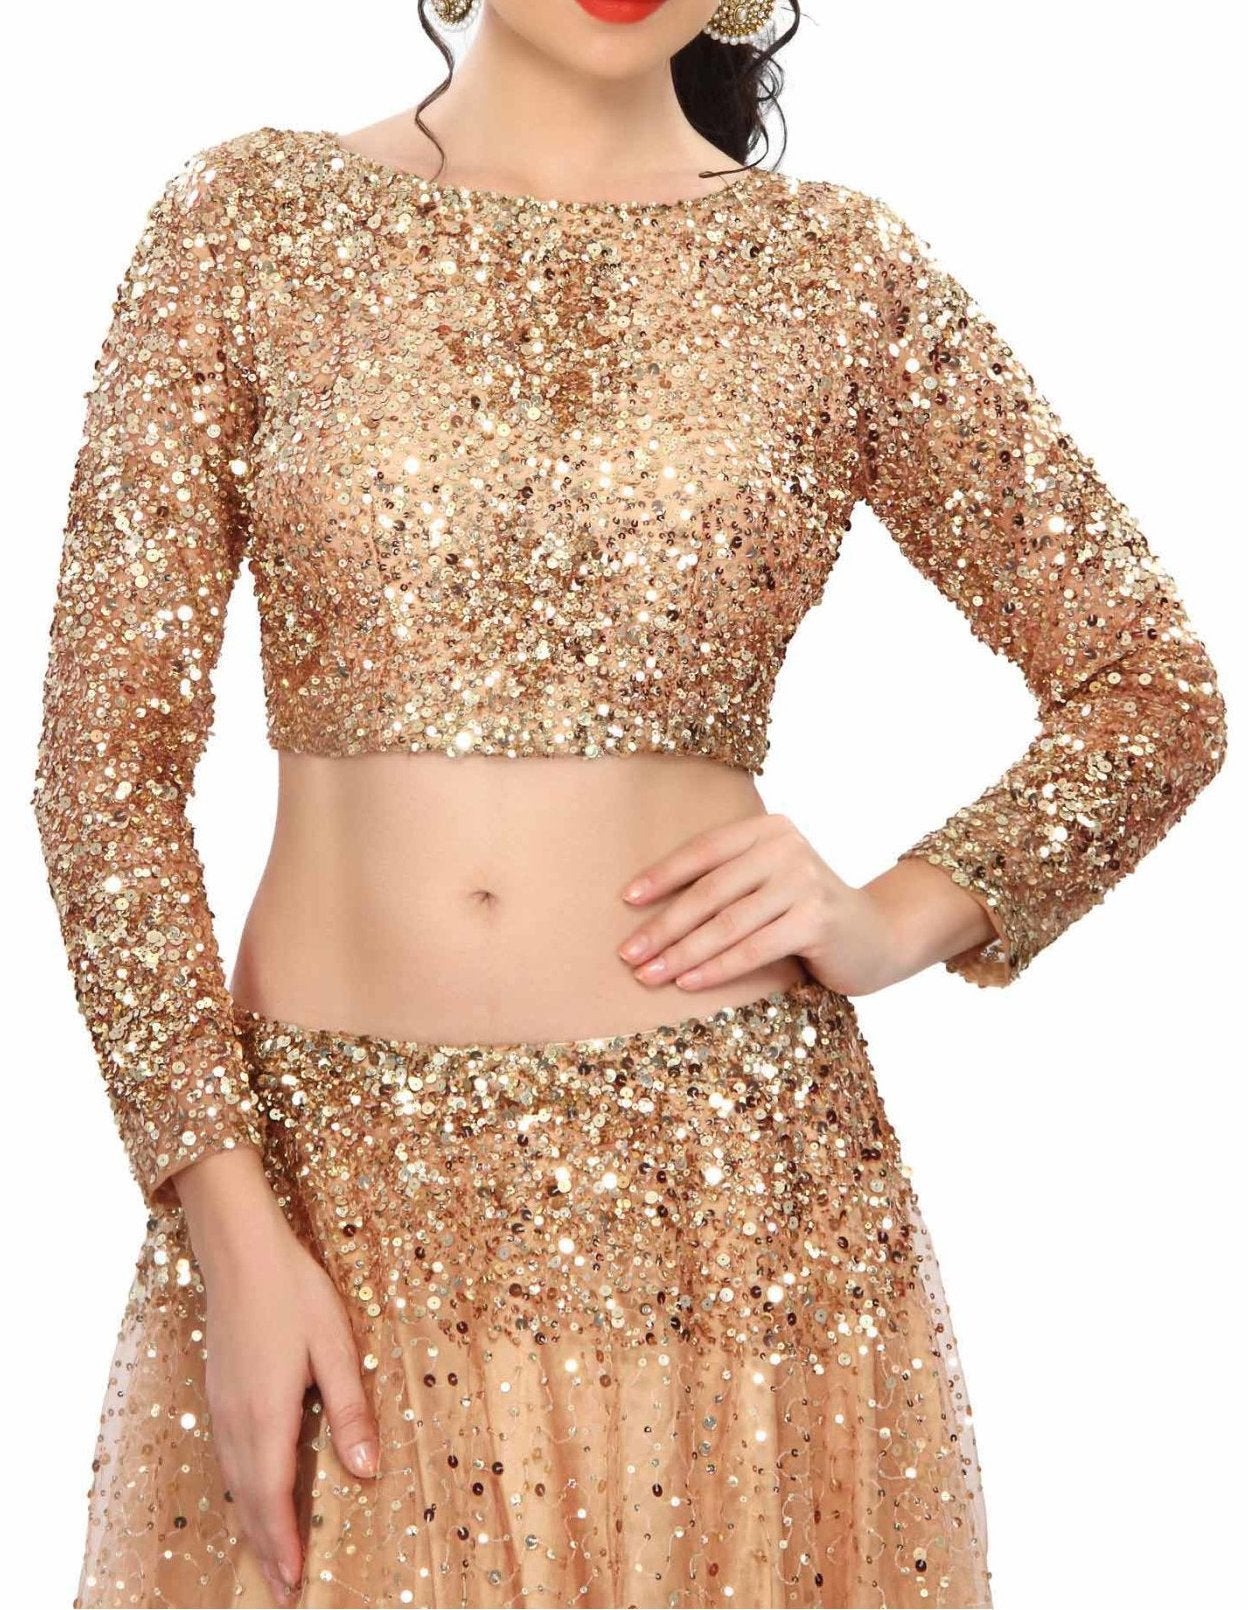 Gold lehenga embellished in sequin embroidery - Indian Clothing in Denver, CO, Aurora, CO, Boulder, CO, Fort Collins, CO, Colorado Springs, CO, Parker, CO, Highlands Ranch, CO, Cherry Creek, CO, Centennial, CO, and Longmont, CO. Nationwide shipping USA - India Fashion X